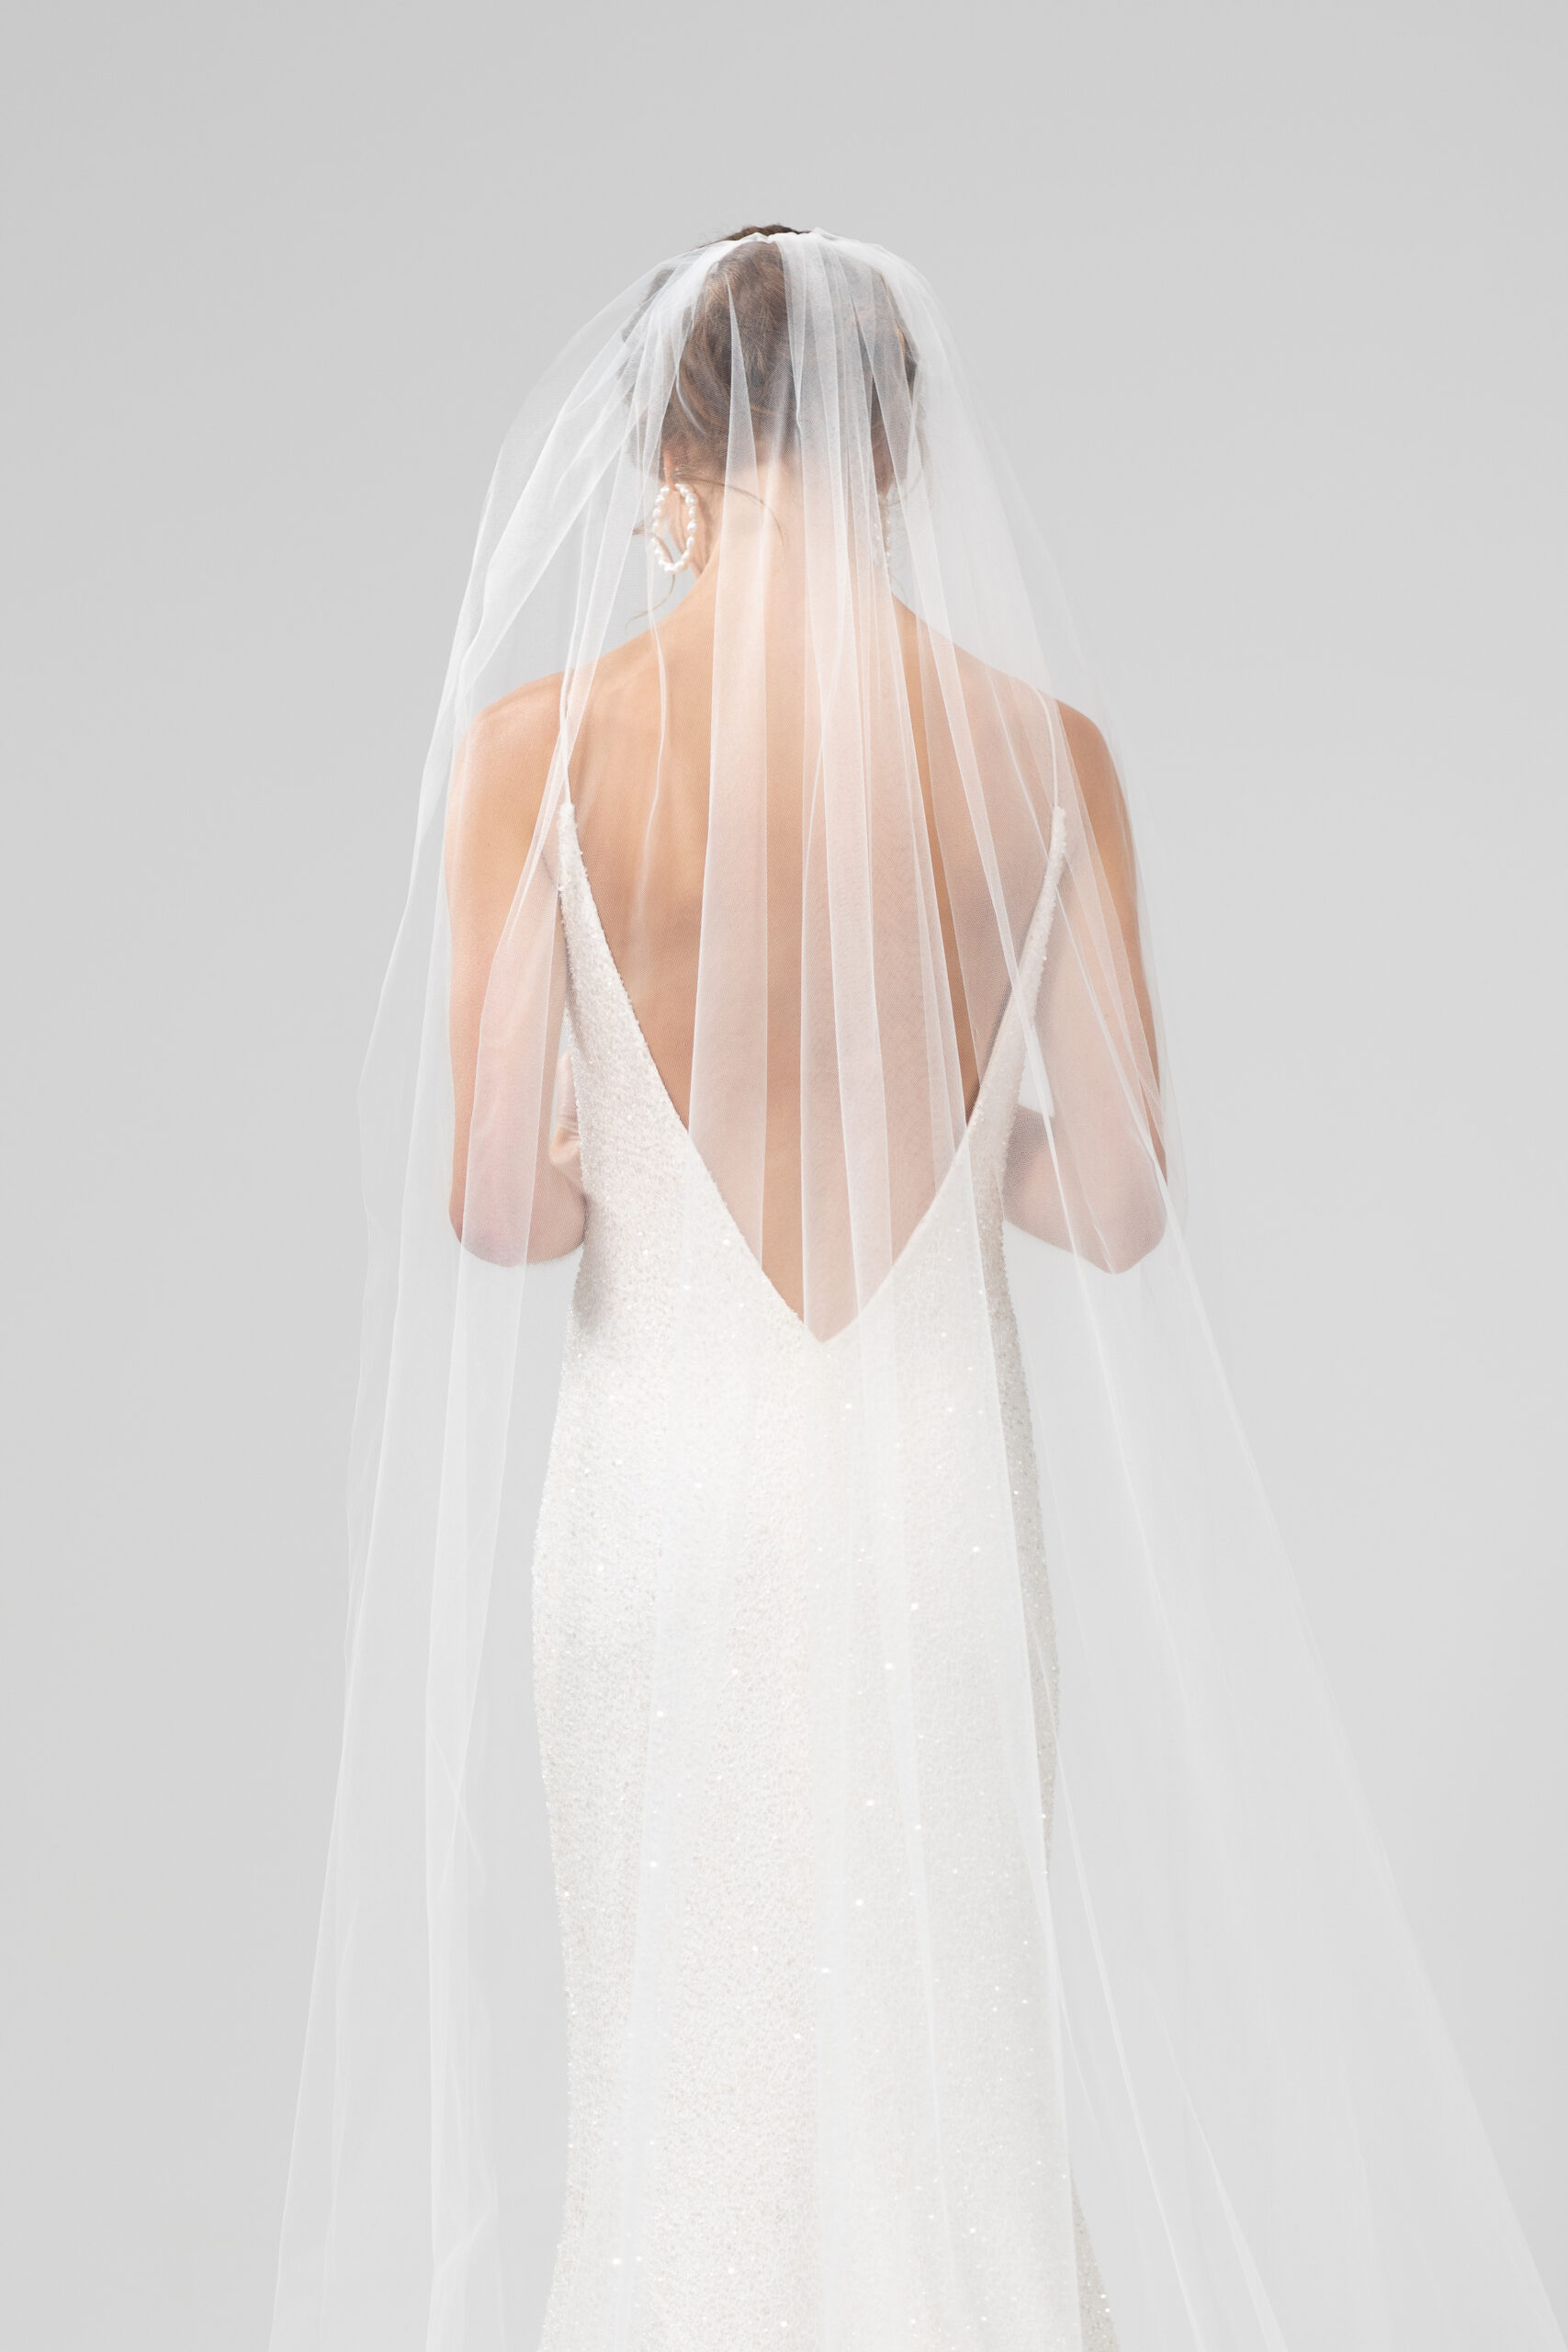 Back view of model wearing rio, a single layer veil 2.2.m veil.